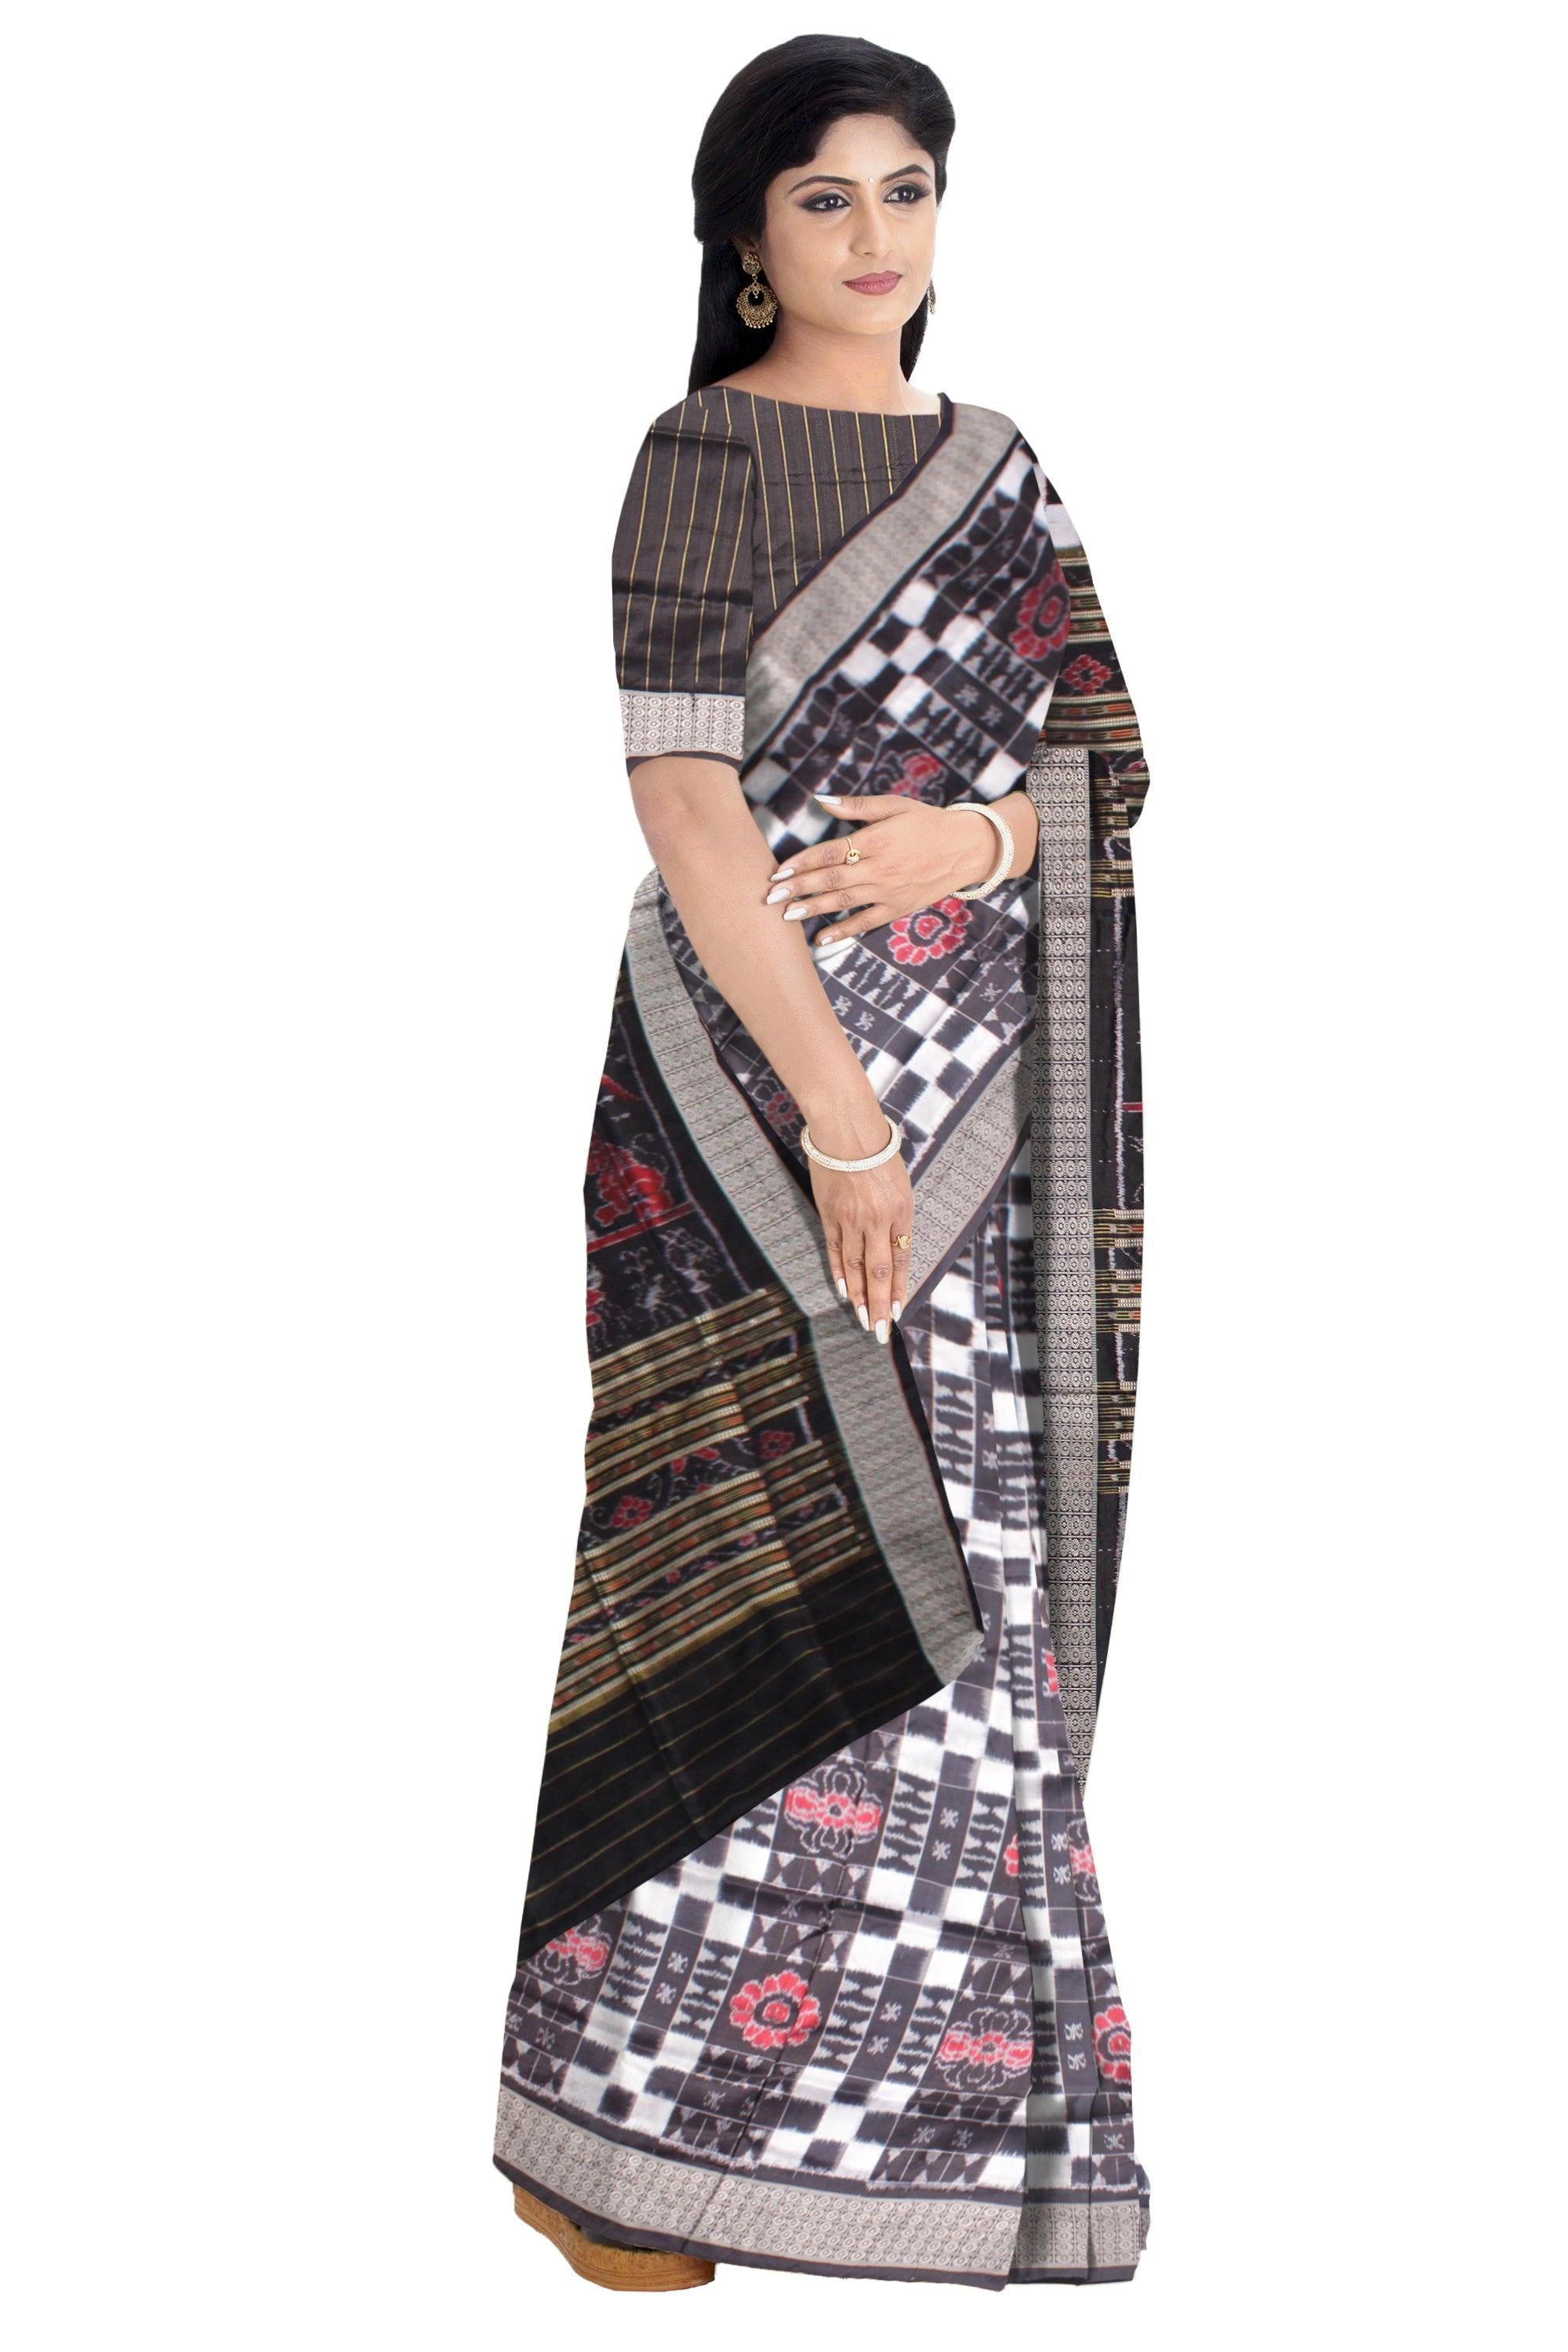 PASAPALI WORK PURE SILK SAREE IS BLACK AND WHITE COLOR BASE, WITH BLOUSE PIECE. - Koshali Arts & Crafts Enterprise